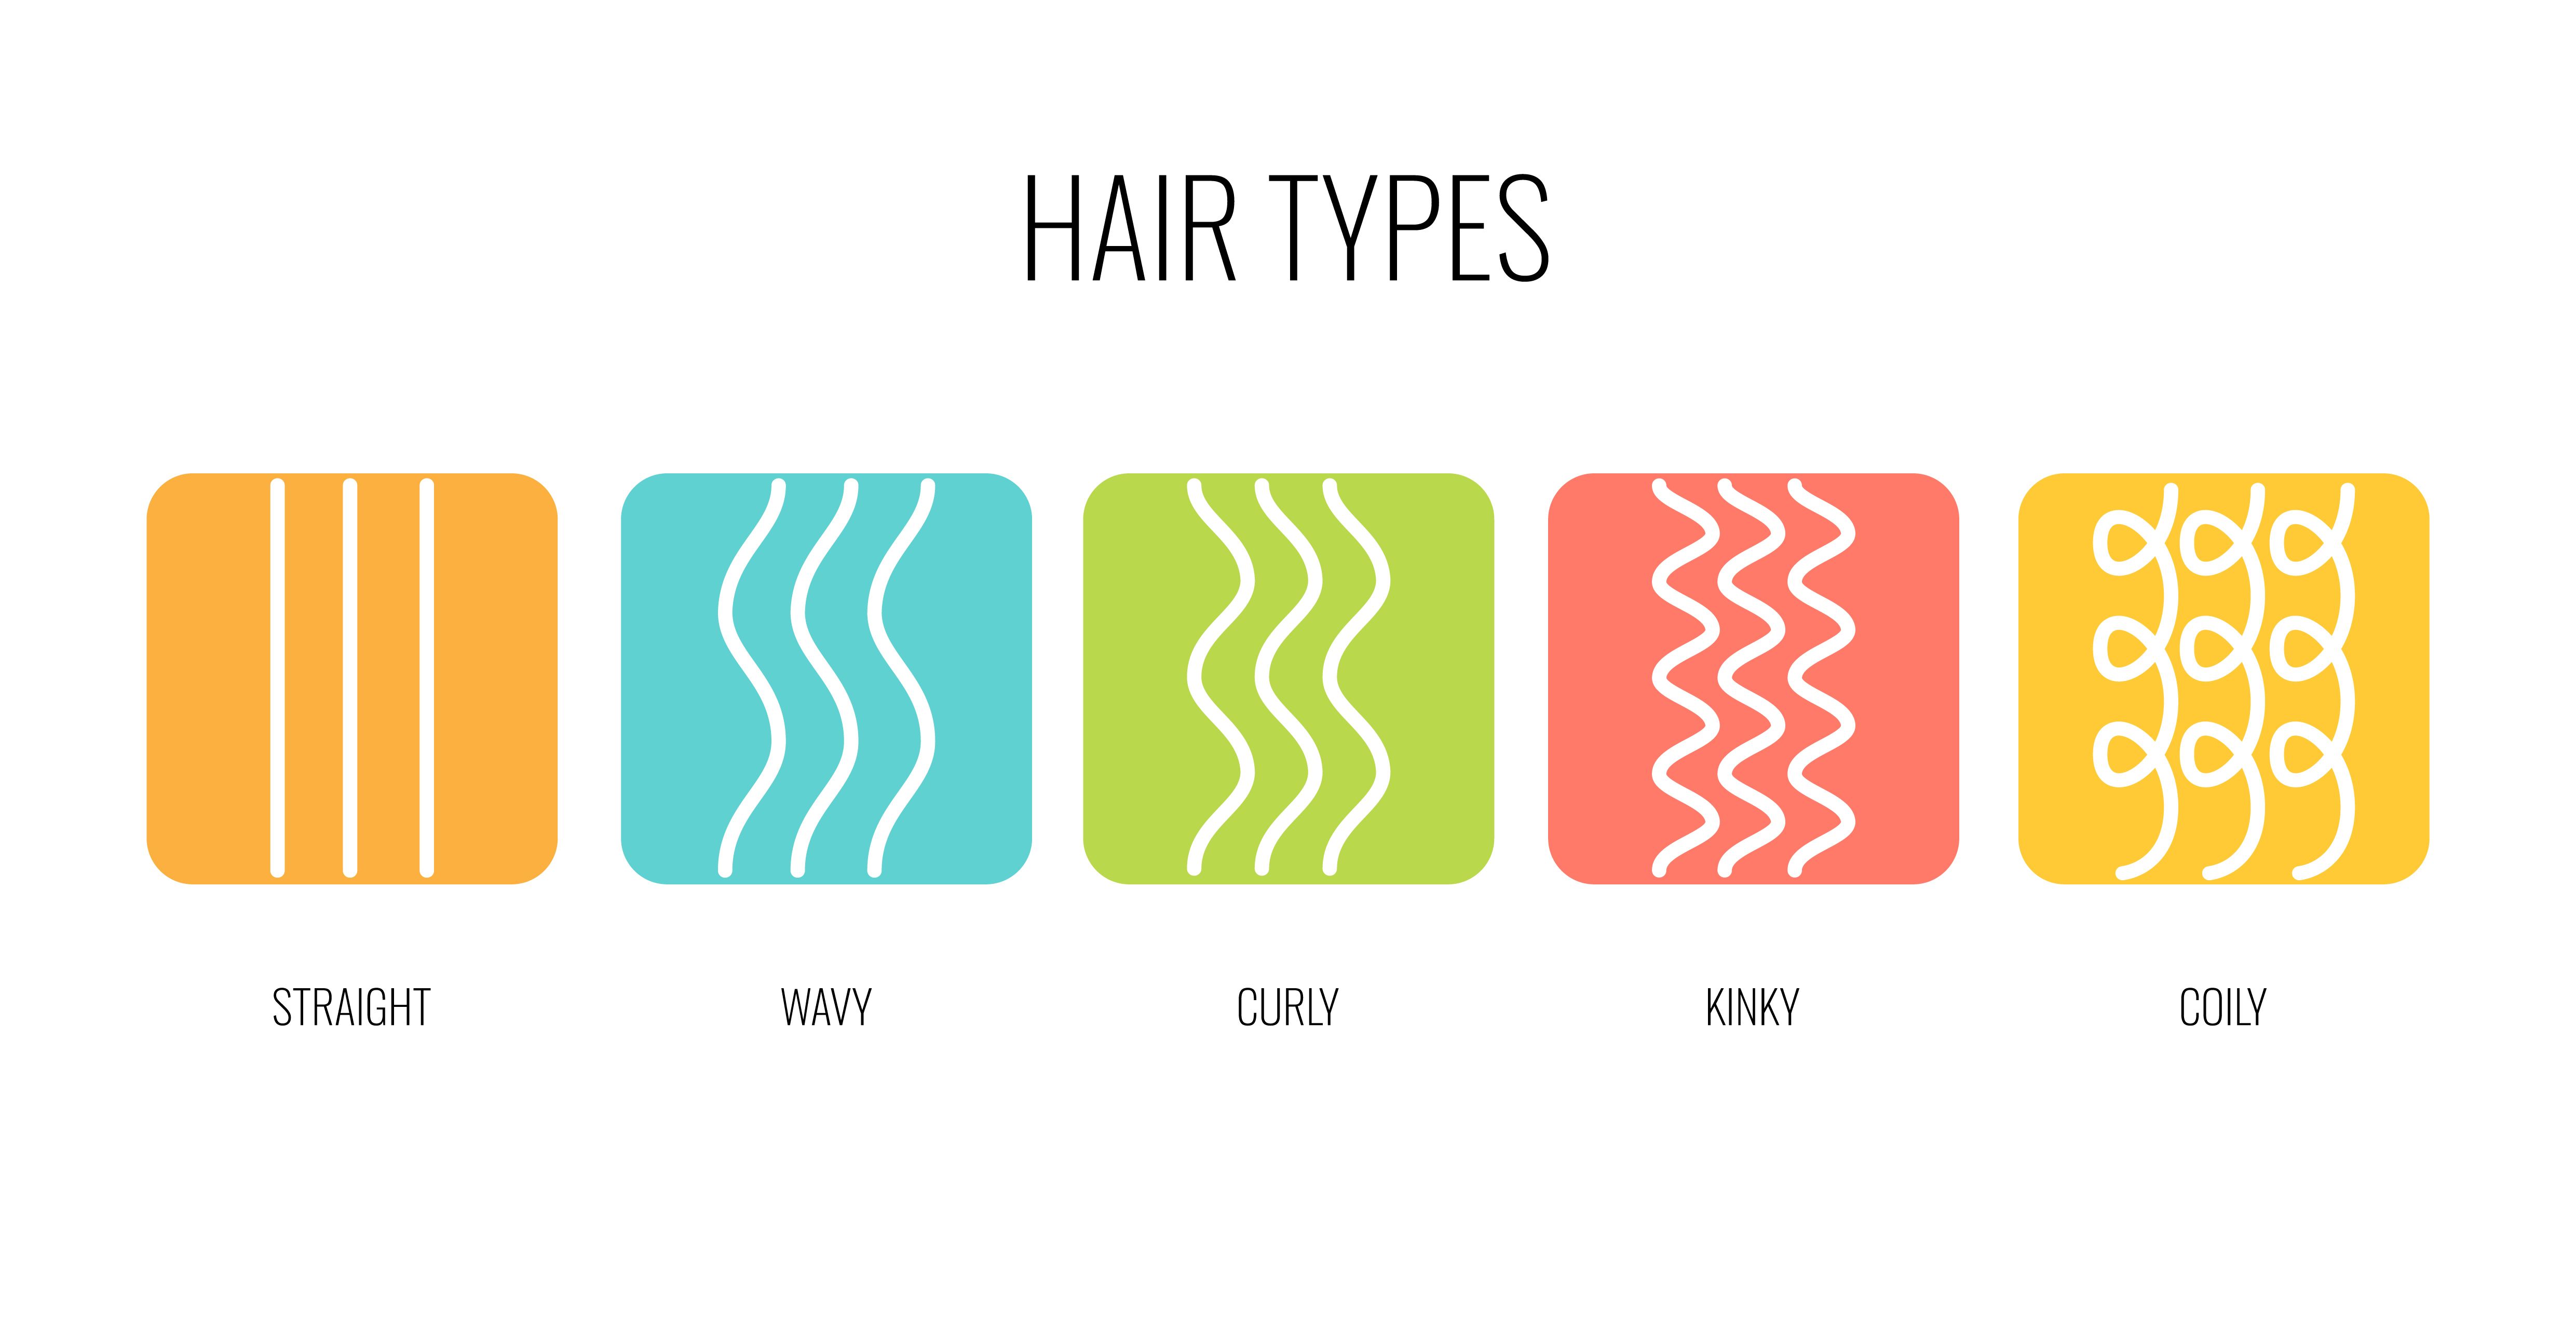 Knowing Your Hair: Which Hair Type Are You?